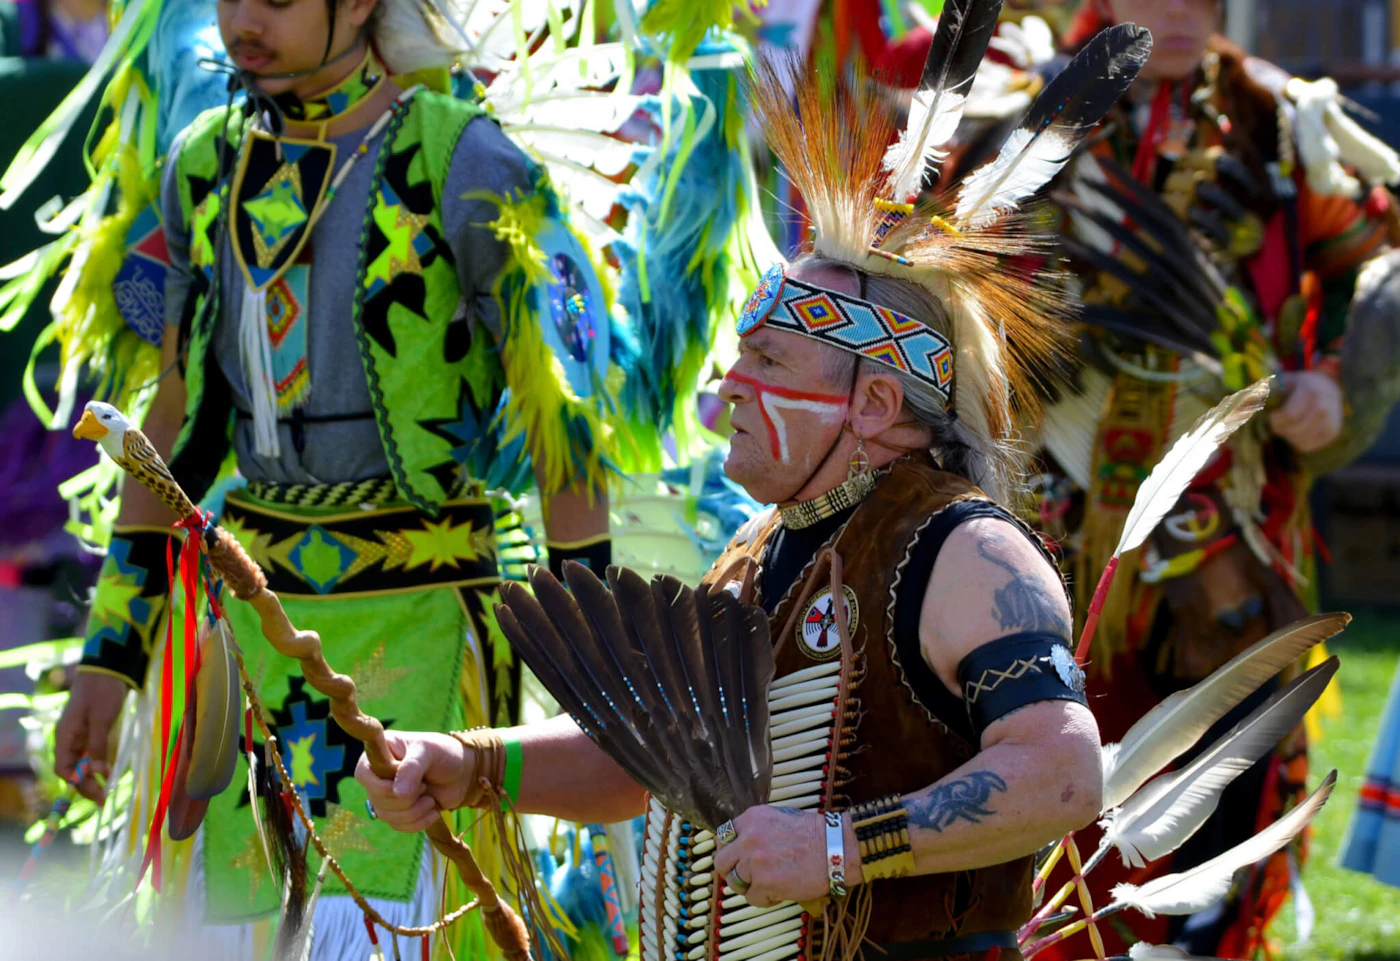 Members of the Mocanan tribe are pictured here at the 2018 Blacksburg Native Spring Pow Wow, taking part in a traditional dance.